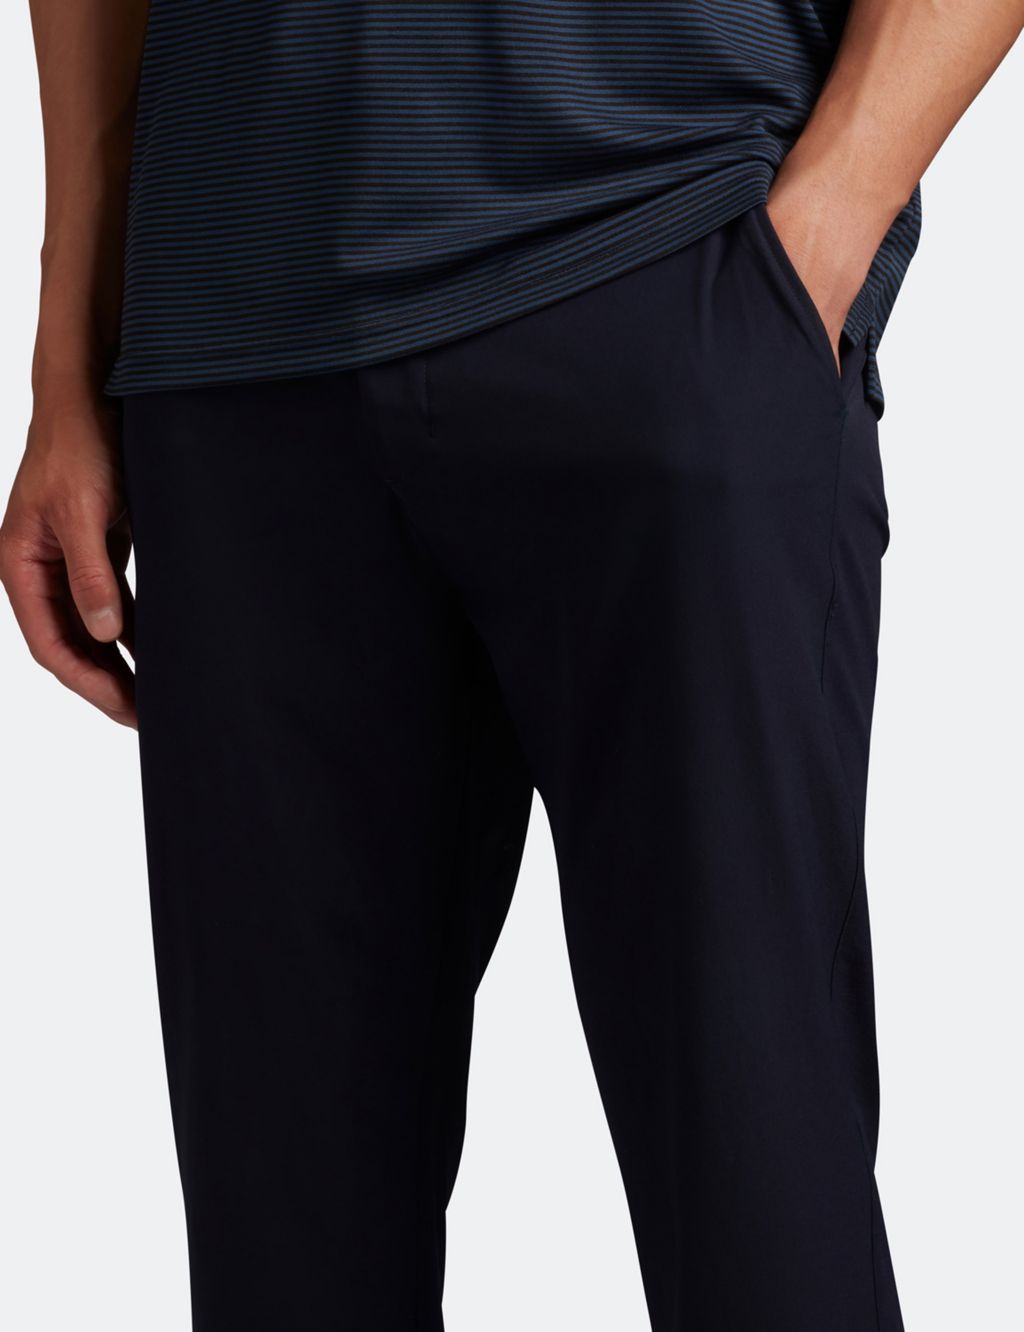 Regular Fit Lightweight Stretch Trousers image 5